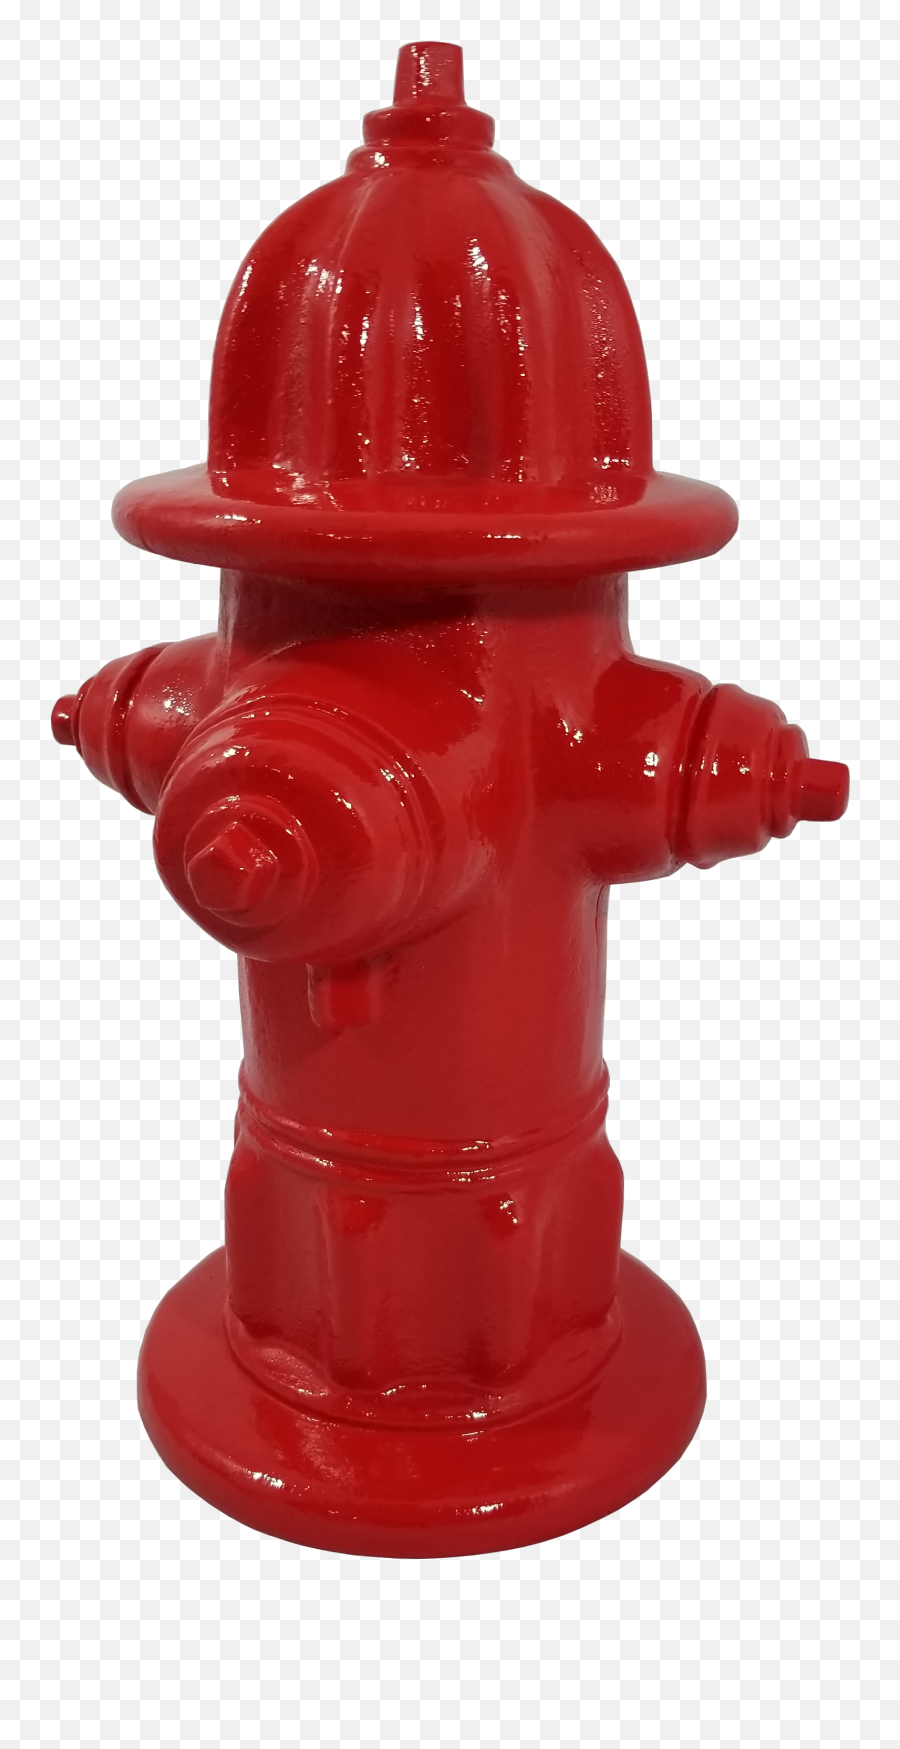 Fire Hydrant Png - Fire Hydrant Transparent Background Emoji,Fire On Transparent Background